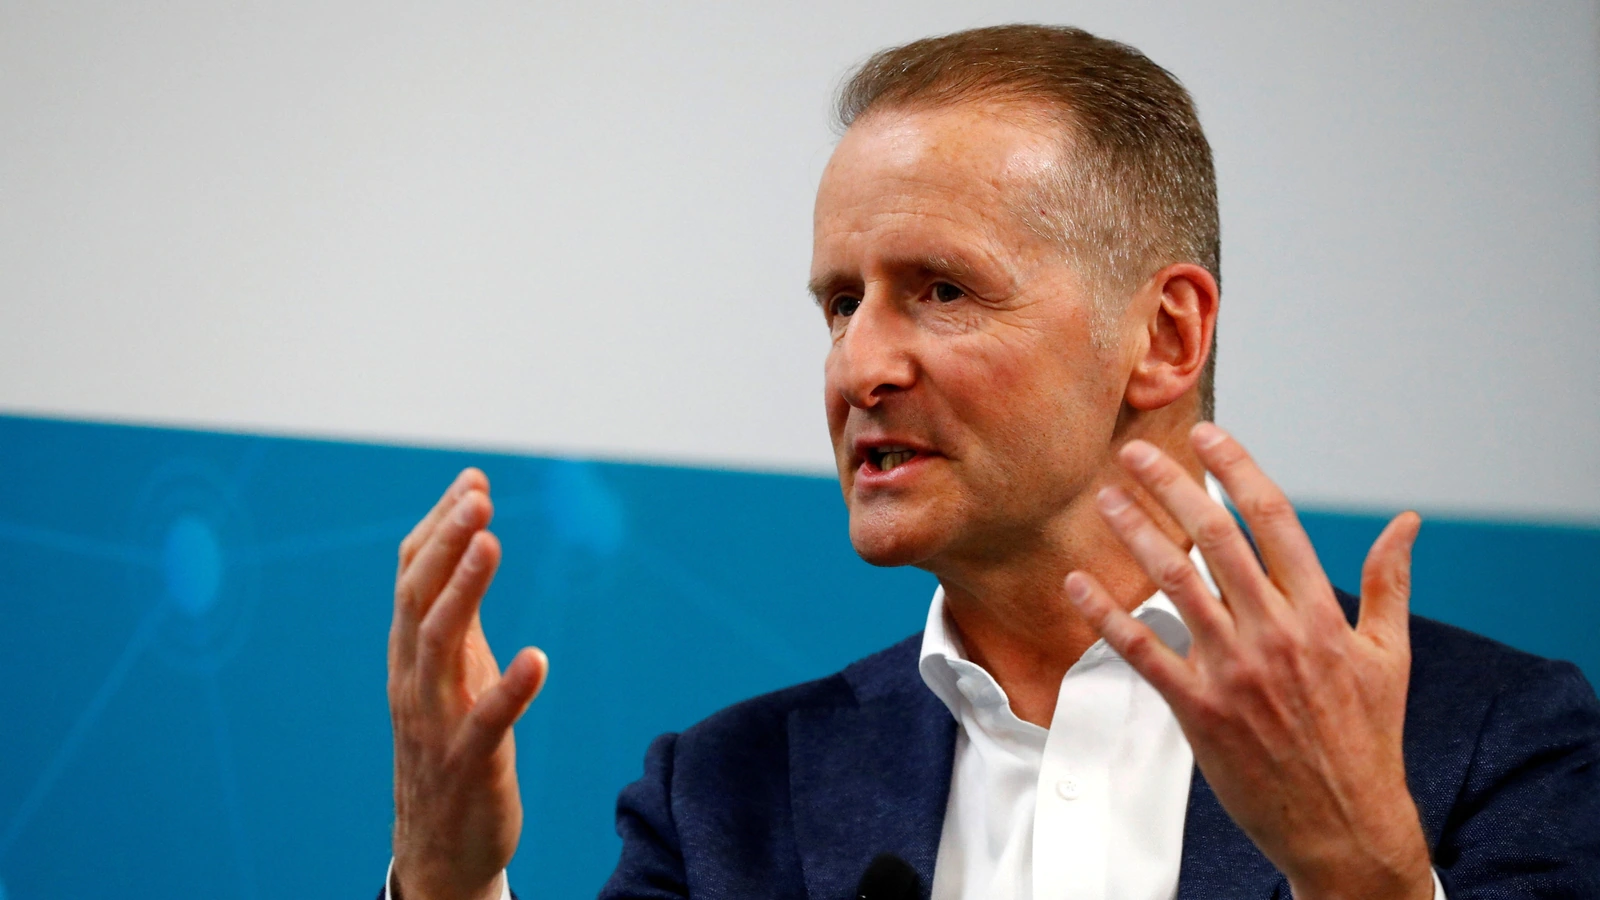 Volkswagen’s billionaire clan plotted CEO ouster when he was on US trip